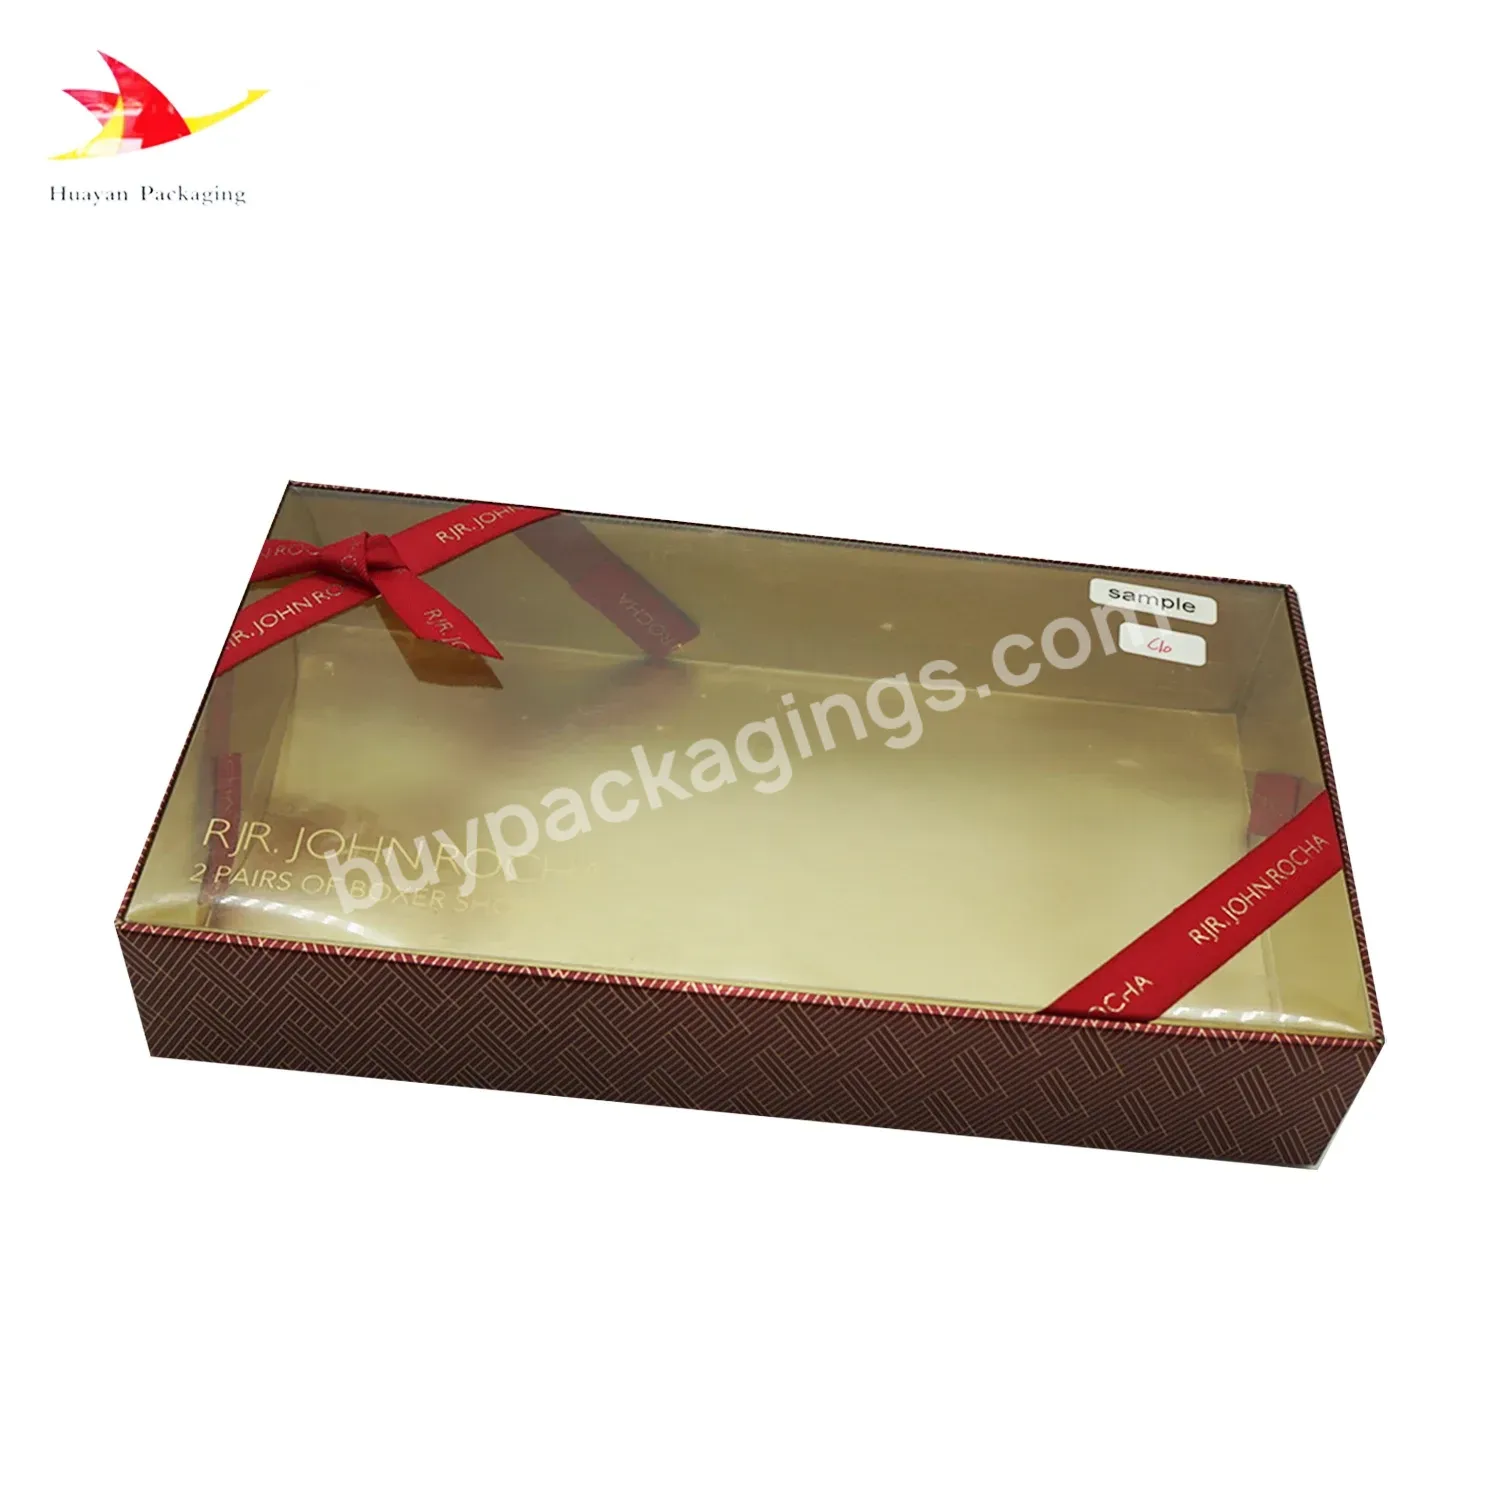 Made By Factory Pvc Top Cover Box With A Bow Of Ribbonchristmas Series Gift Holiday Pvc Packing